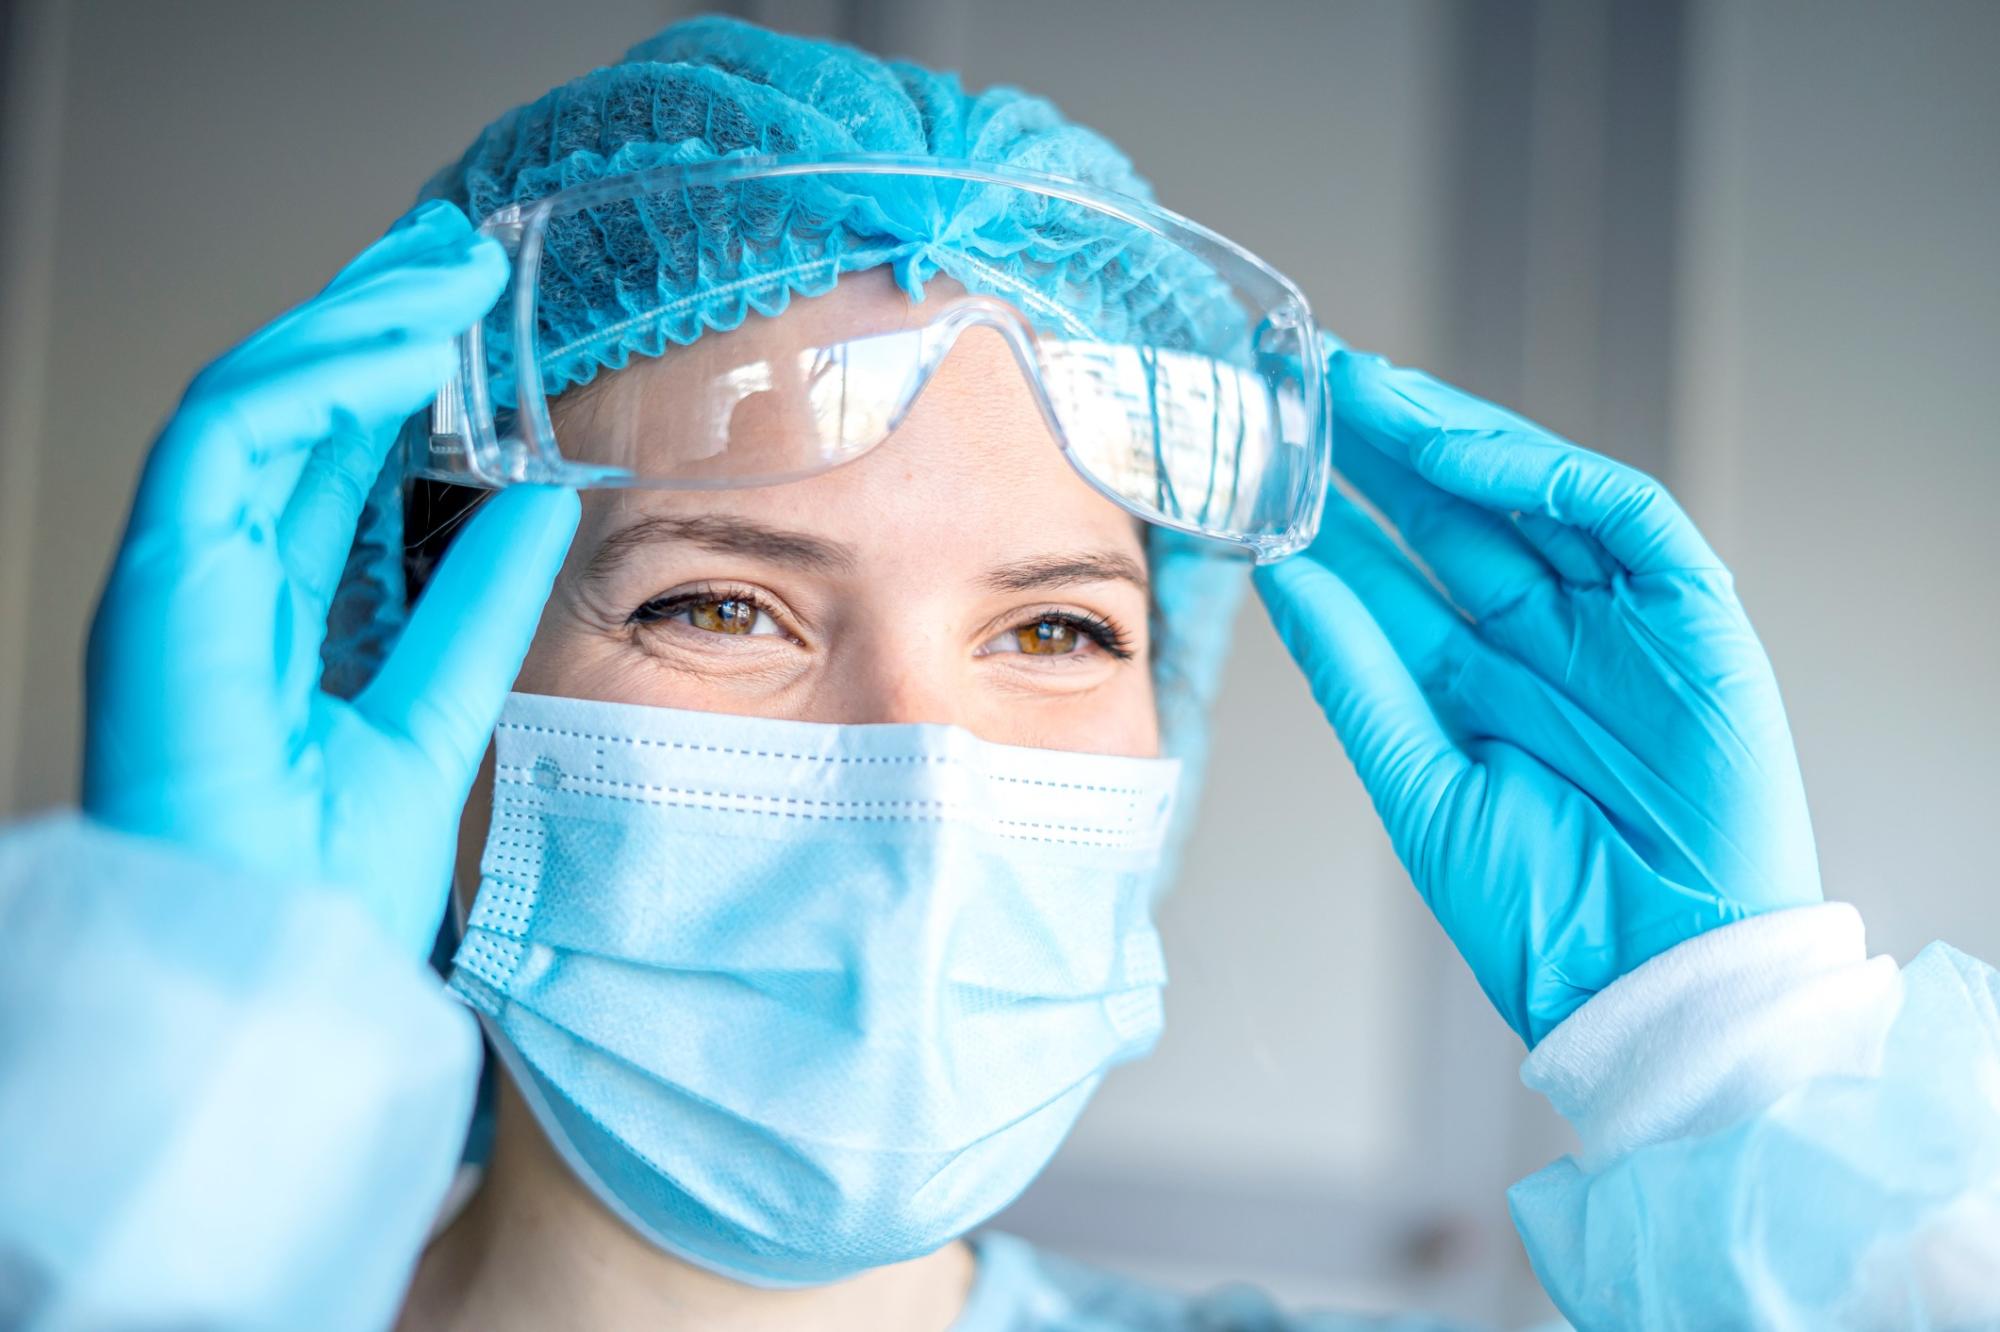 Happy Medical Surgical Doctor and Health Care, Portrait of Surgeon Doctor in PPE Equipment on Isolated Background. Medicine Female Doctors Wearing Face Mask and Cap for Patients Surgery Work.